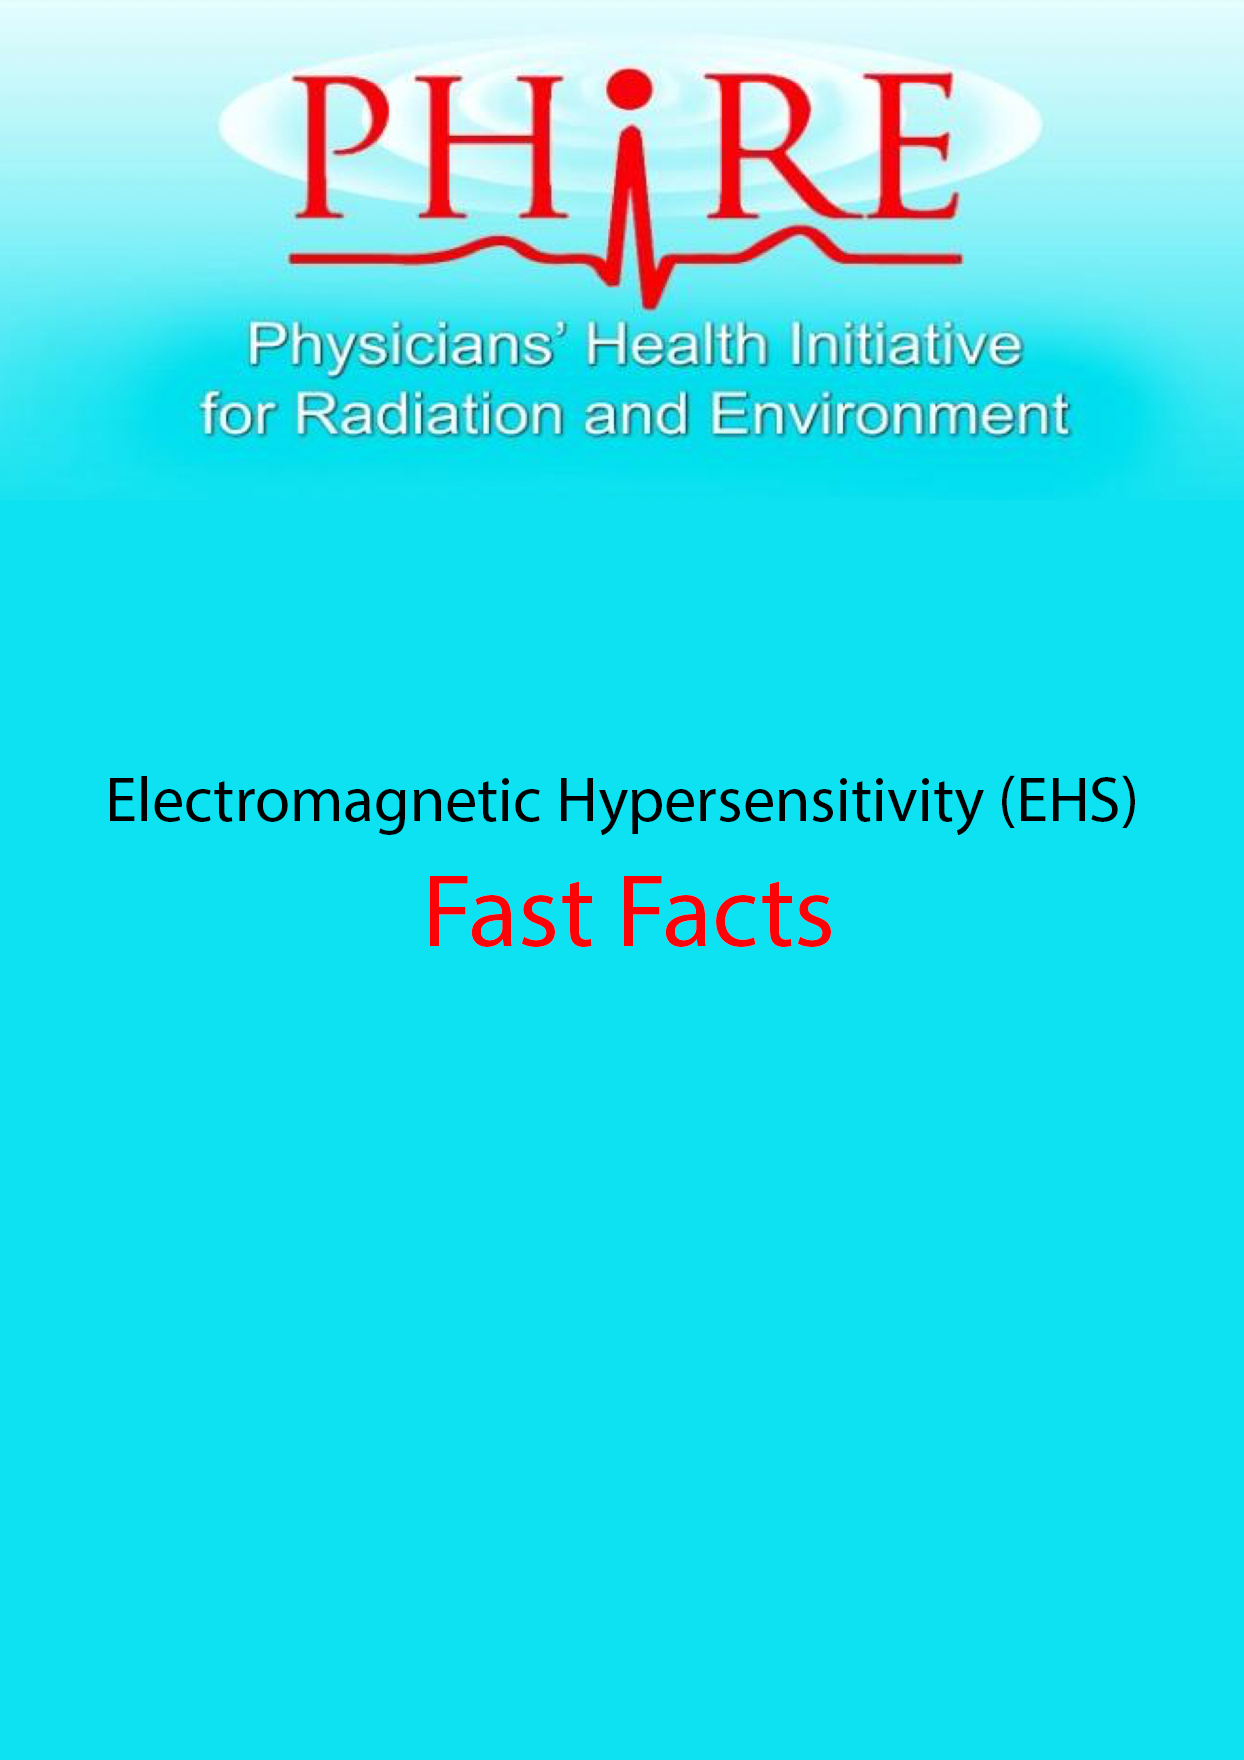 Electromagnetic Hypersensitivity (EHS) Fast Facts